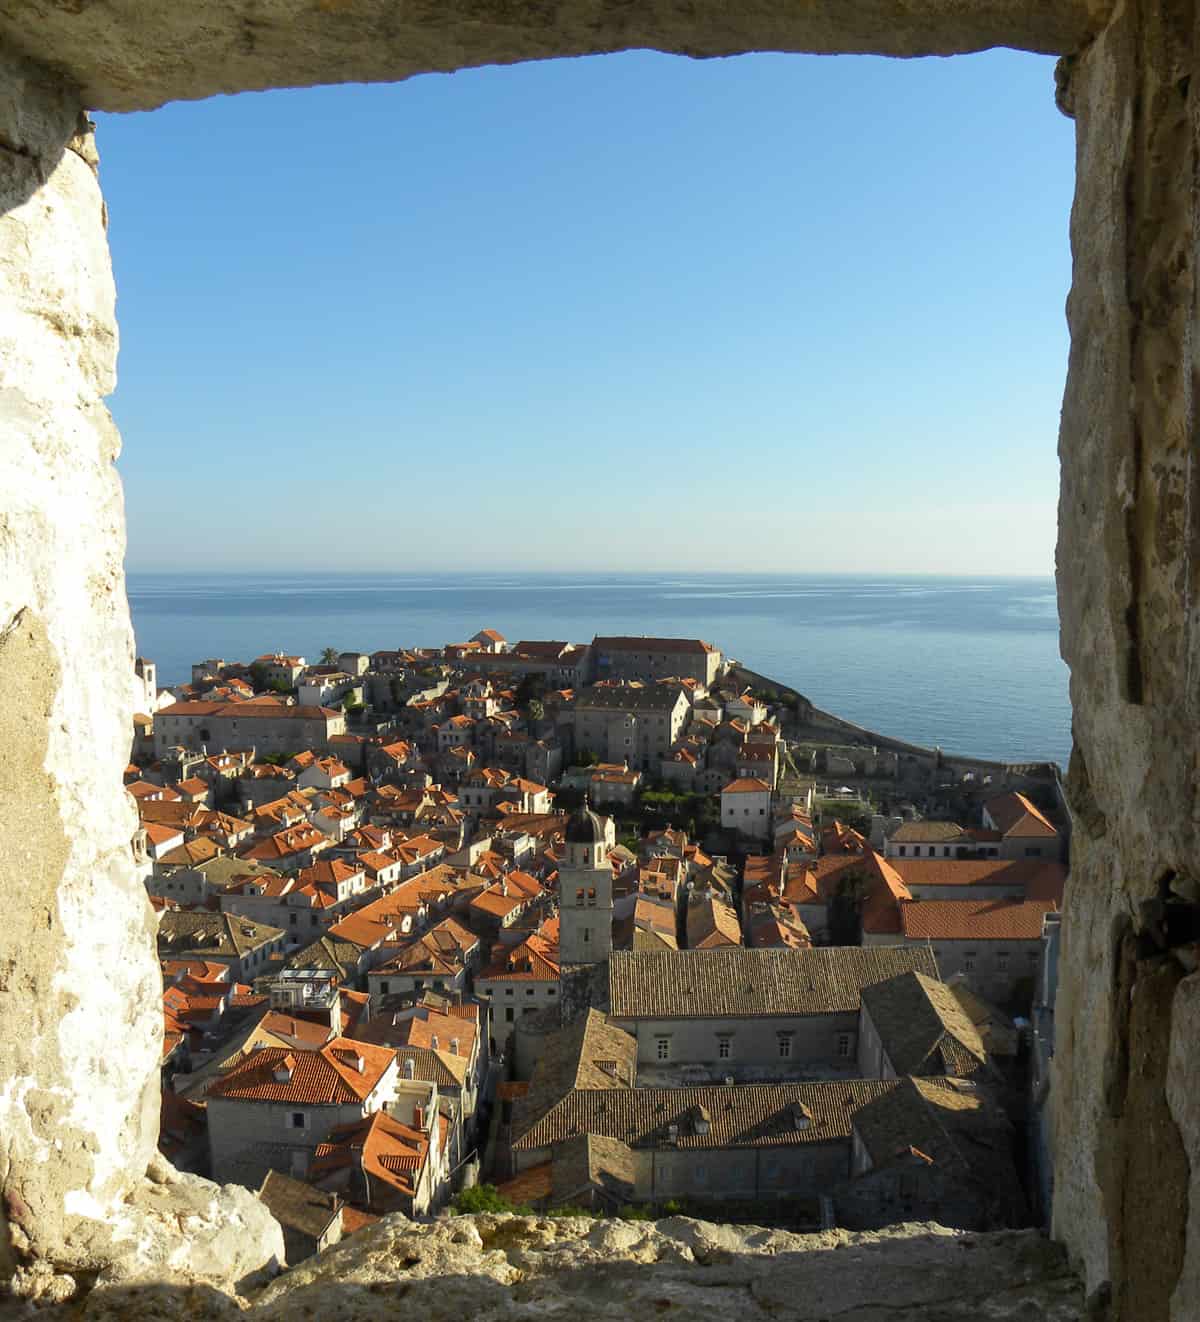 Walking the city walls. Highlights and Lowlights of Dubrovnik